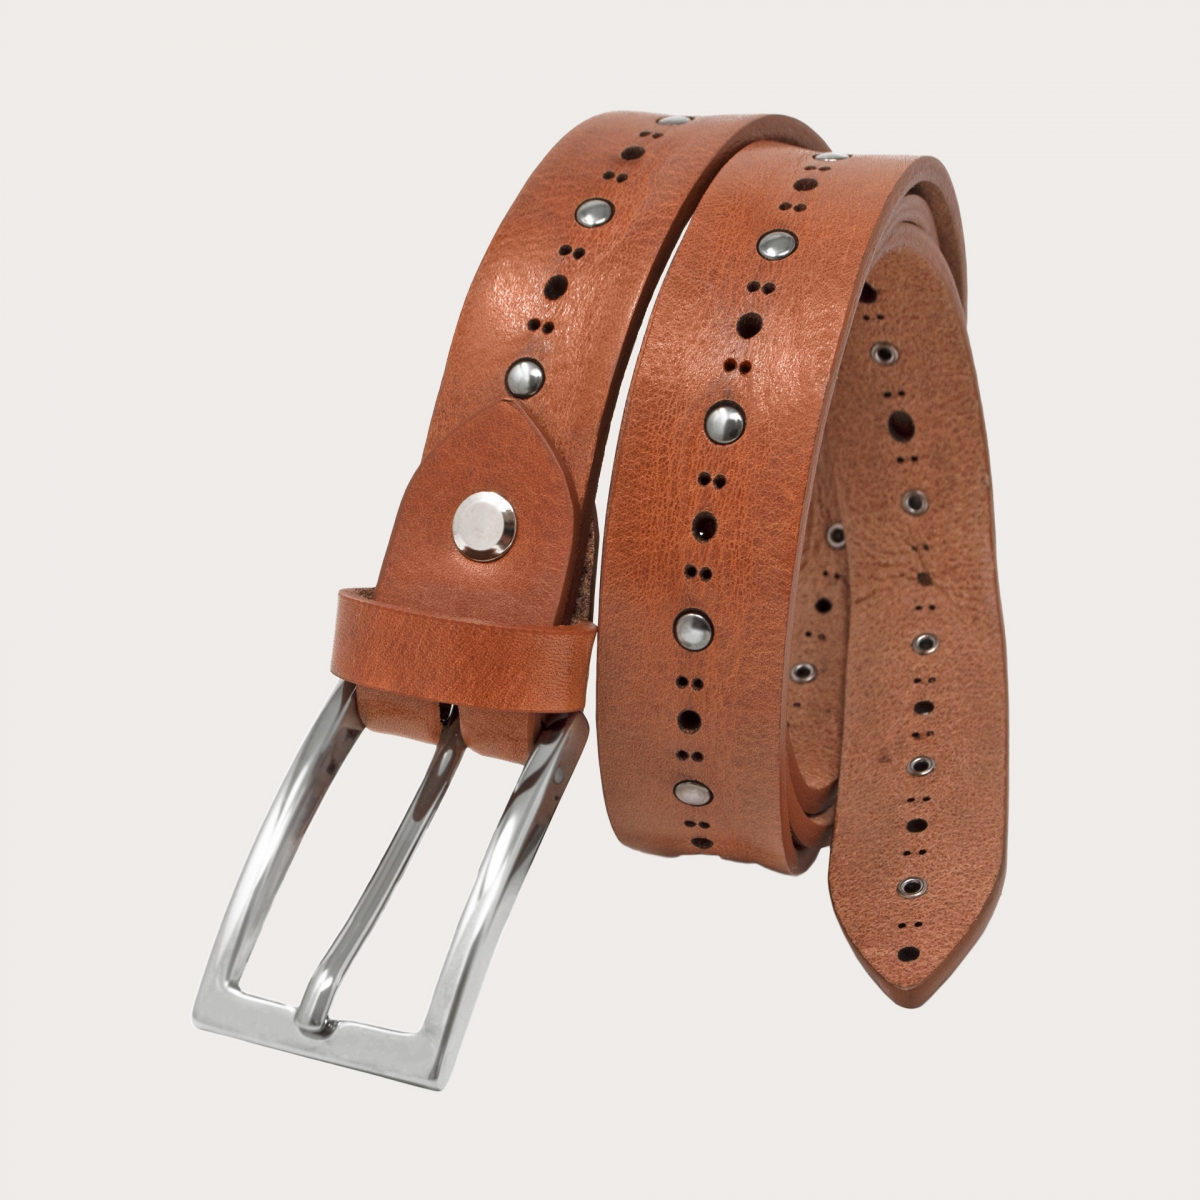 Thin raw cut leather belt with studs, brown